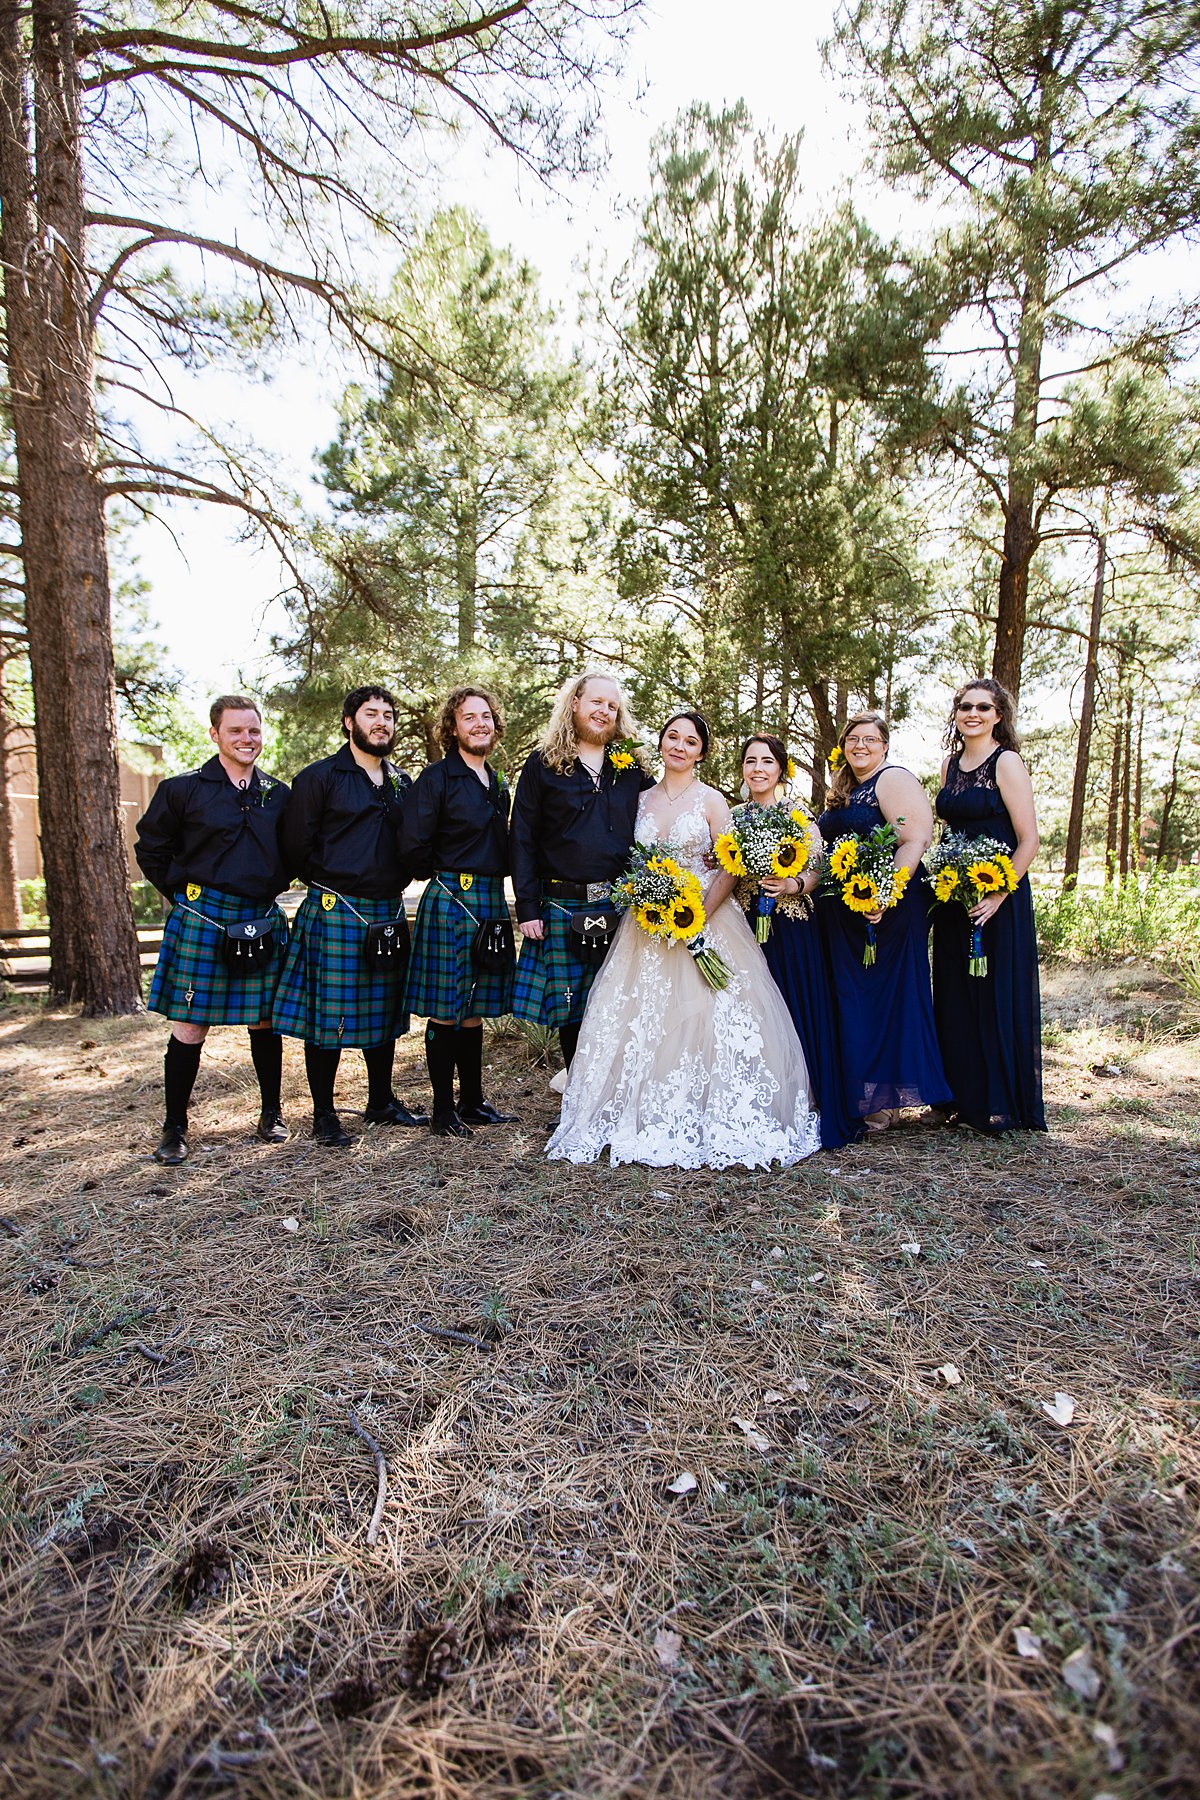 Navy and yellow bridal party in kilts at a Scottish and Sunflower inspired wedding at Riordan Mansion by Flagstaff wedding photographer PMA Photography.